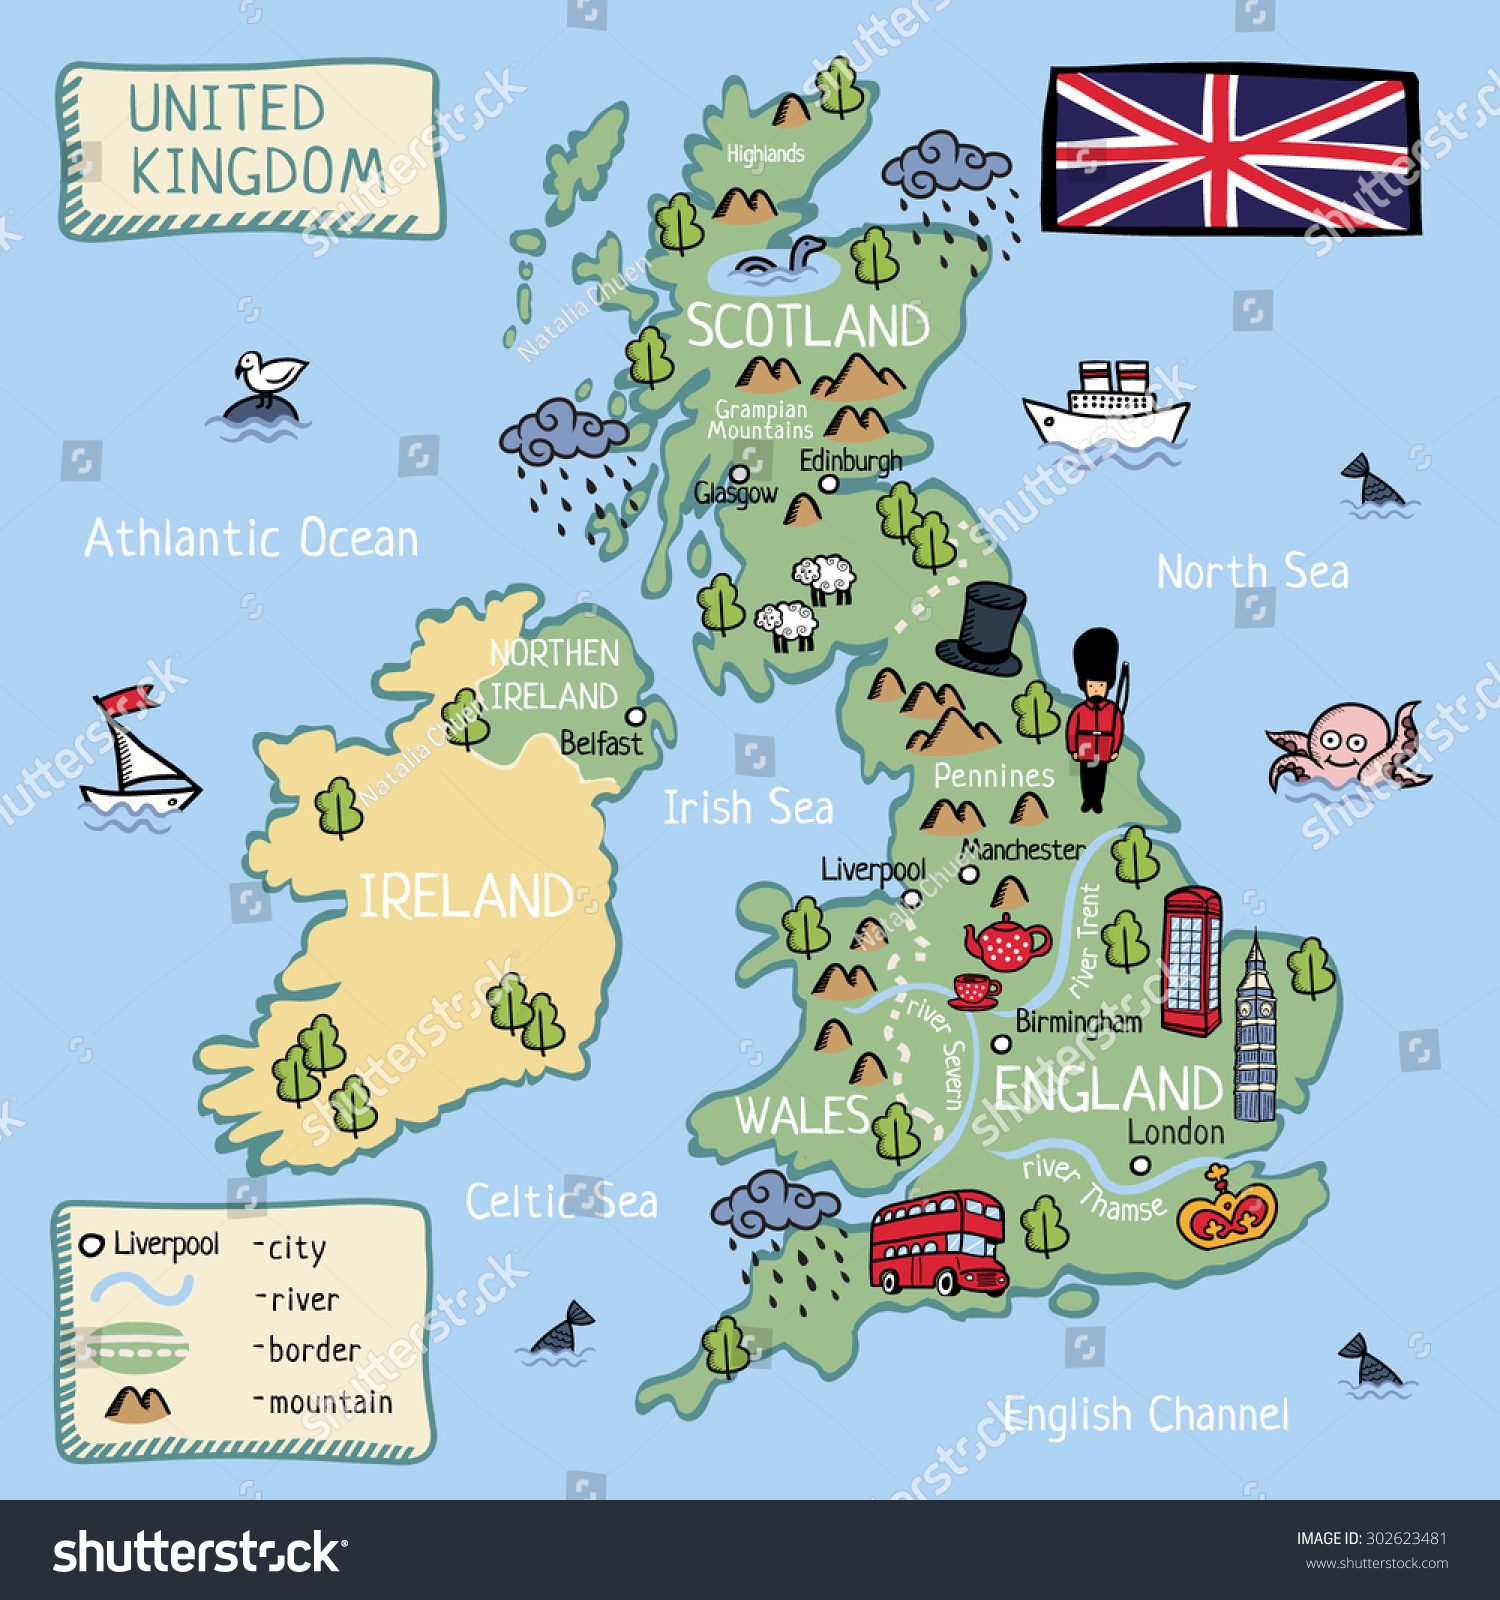 clipart map of uk - photo #30